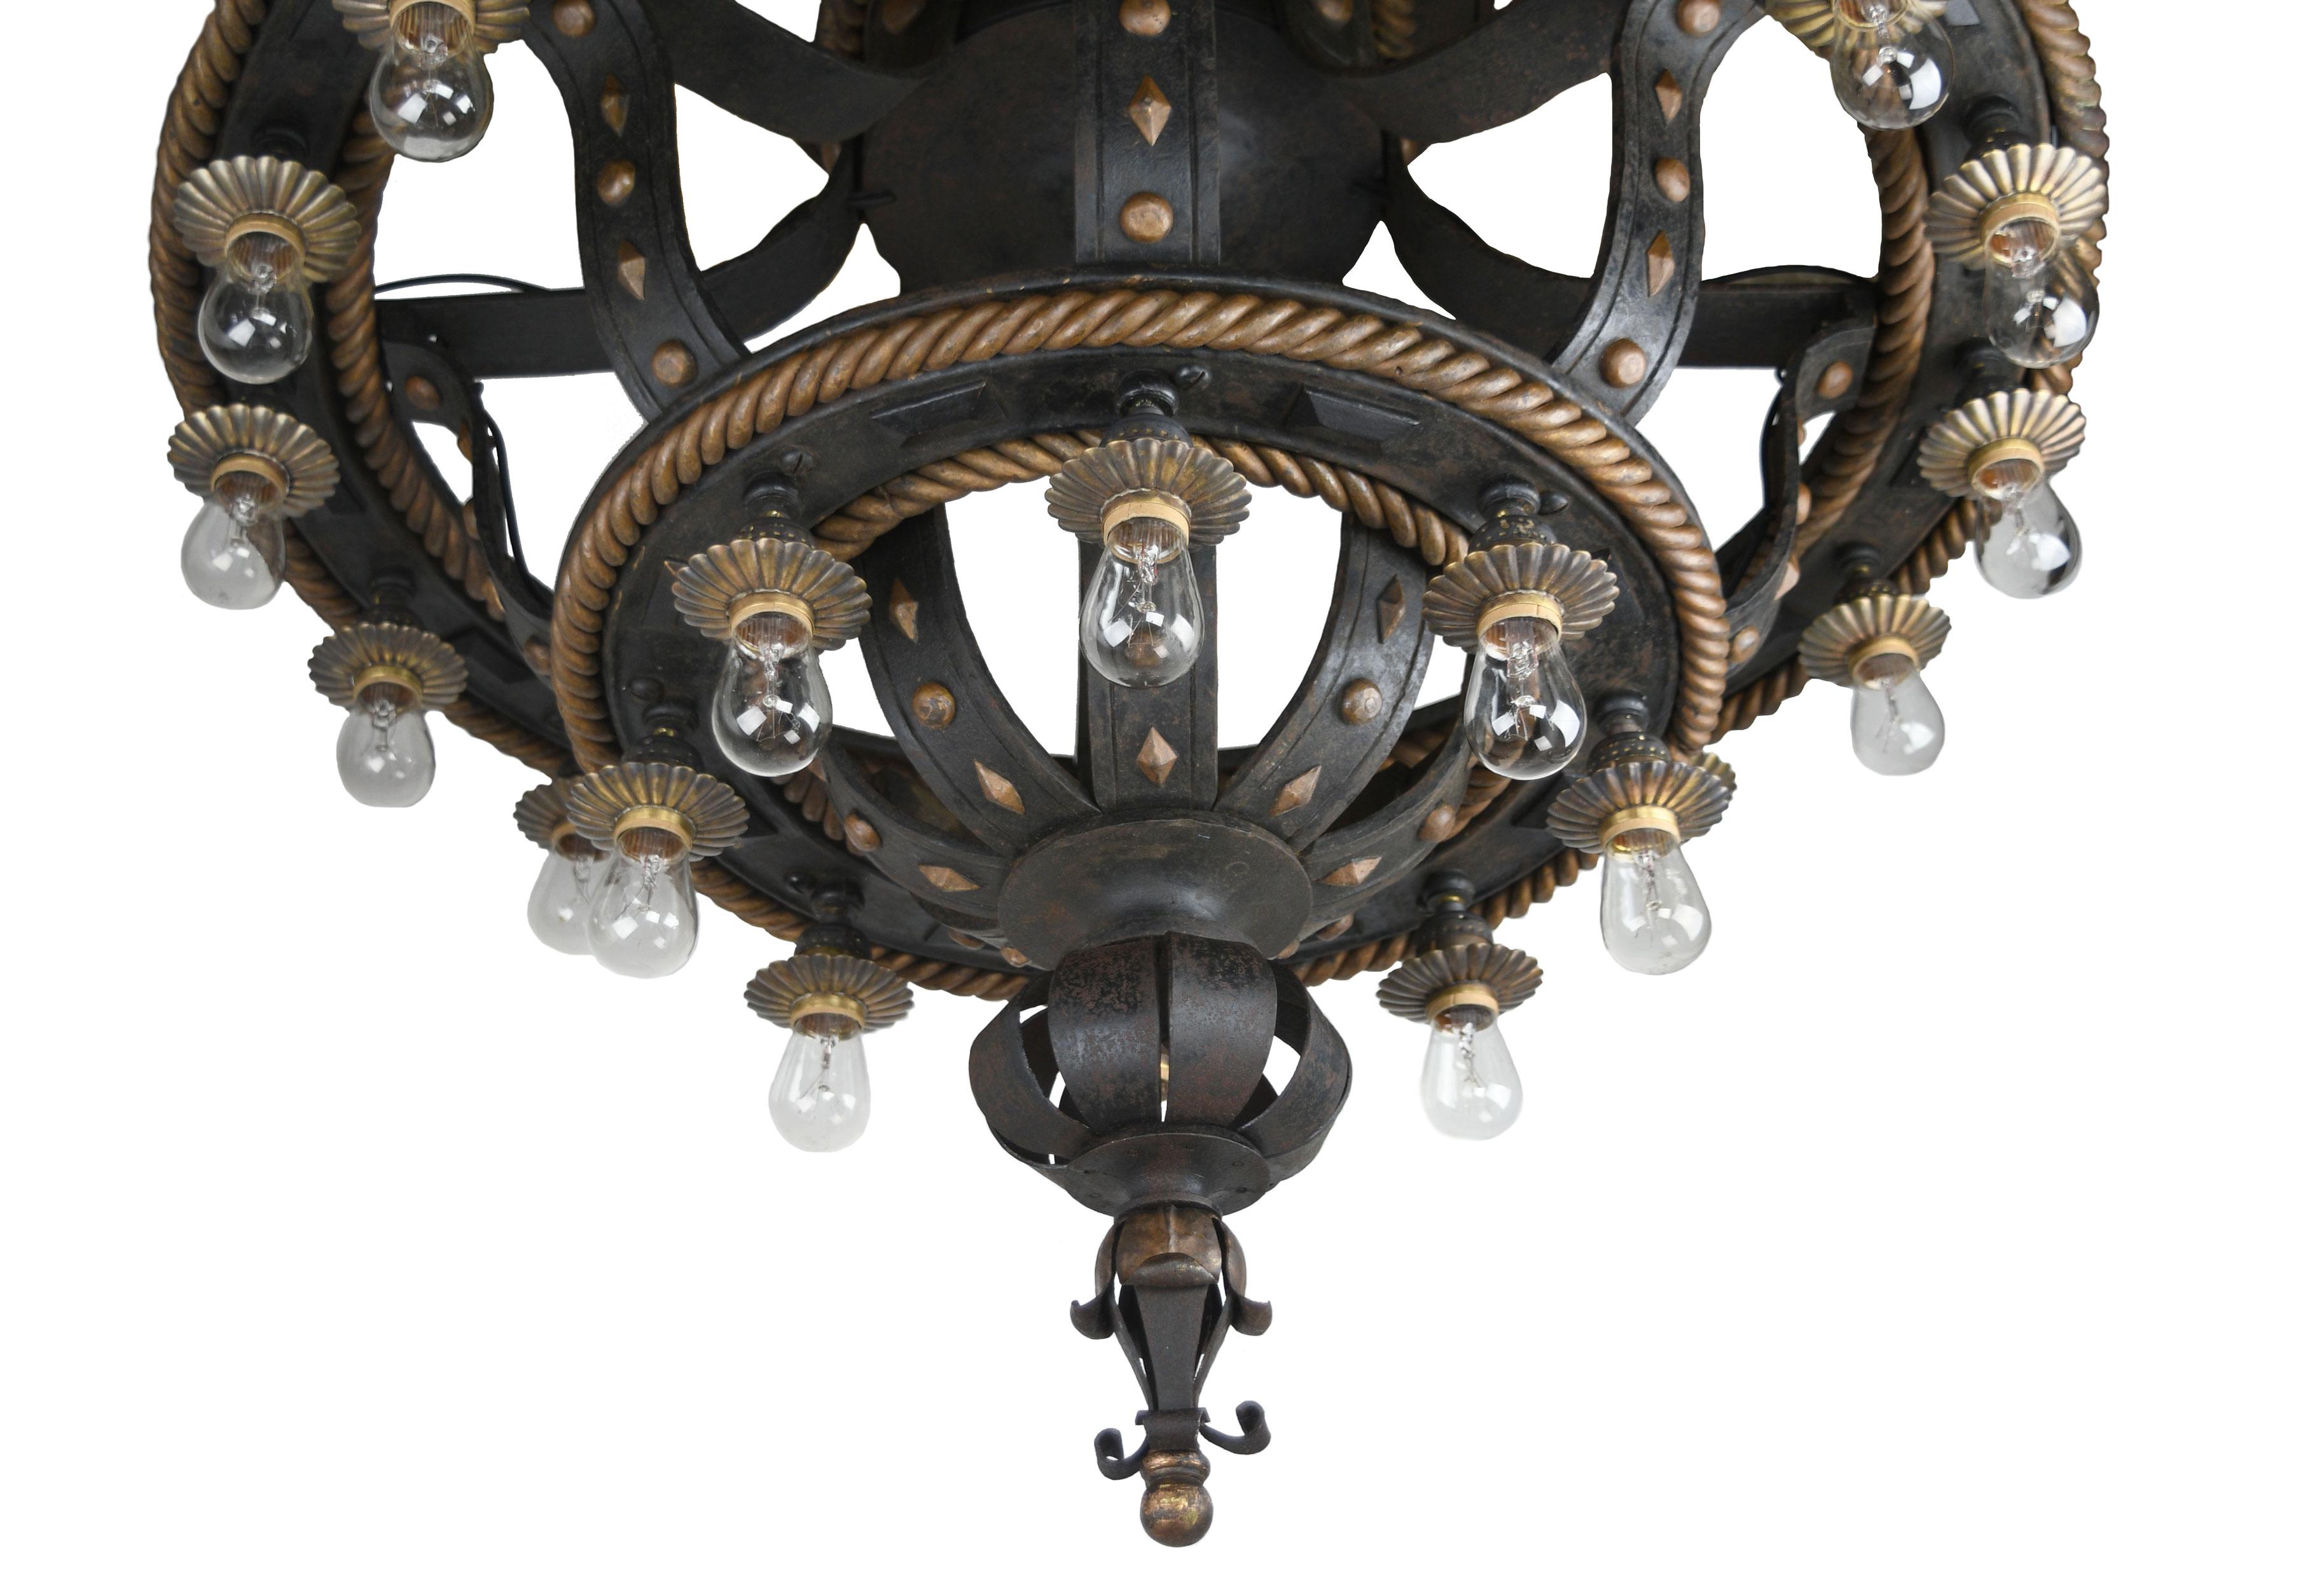 This enormous and exquisite flush mount chandelier features many decorative flourishes and 24 light bulbs making it an extremely illuminating fixture. The sturdy cast iron frame is highlighted by numerous brass floral designs and braided circles.